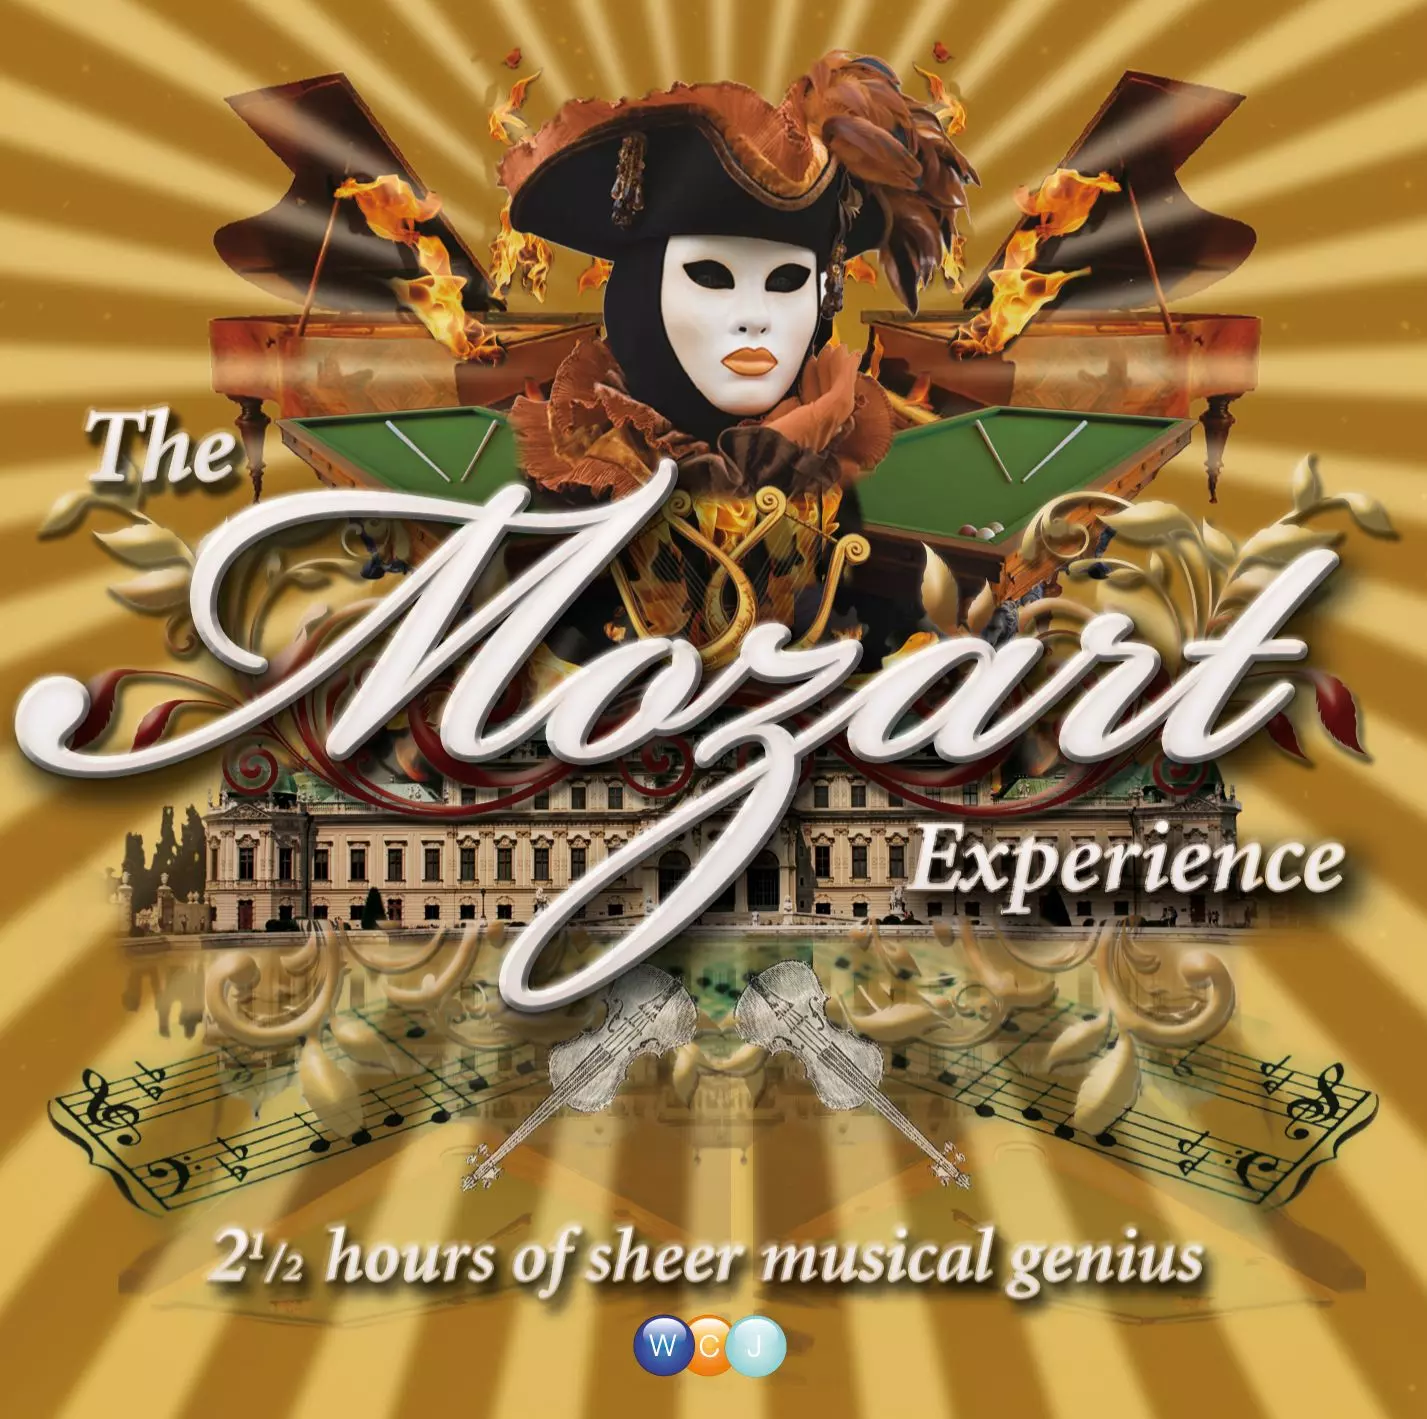 The Mozart Experience